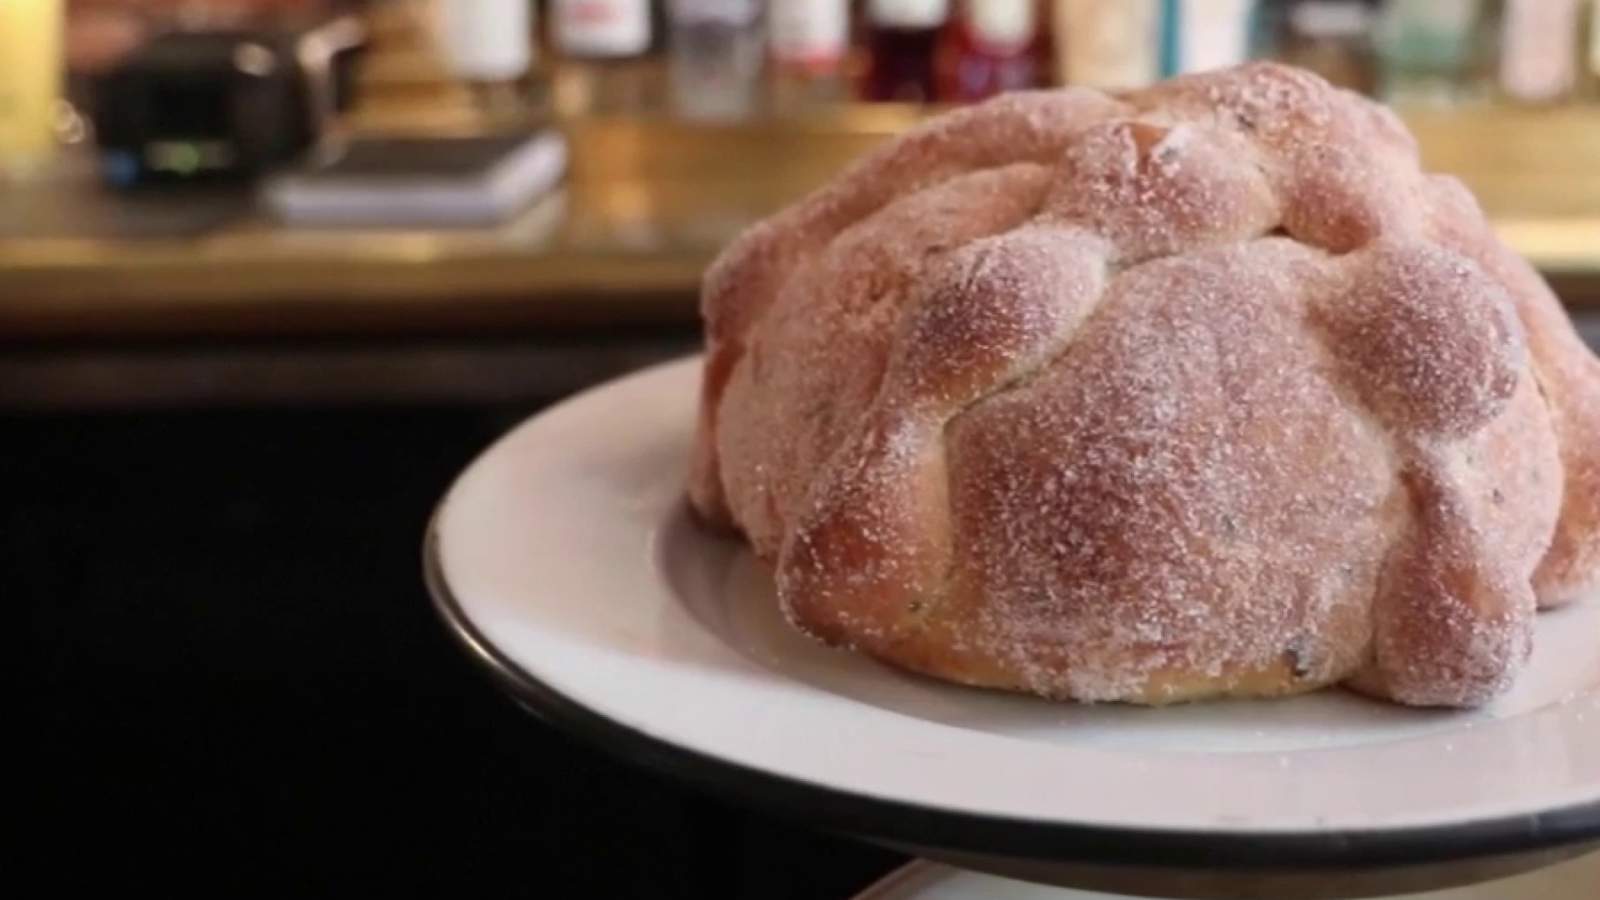 Food for the soul: Significance of Pan de Muerto on Day of the Dead